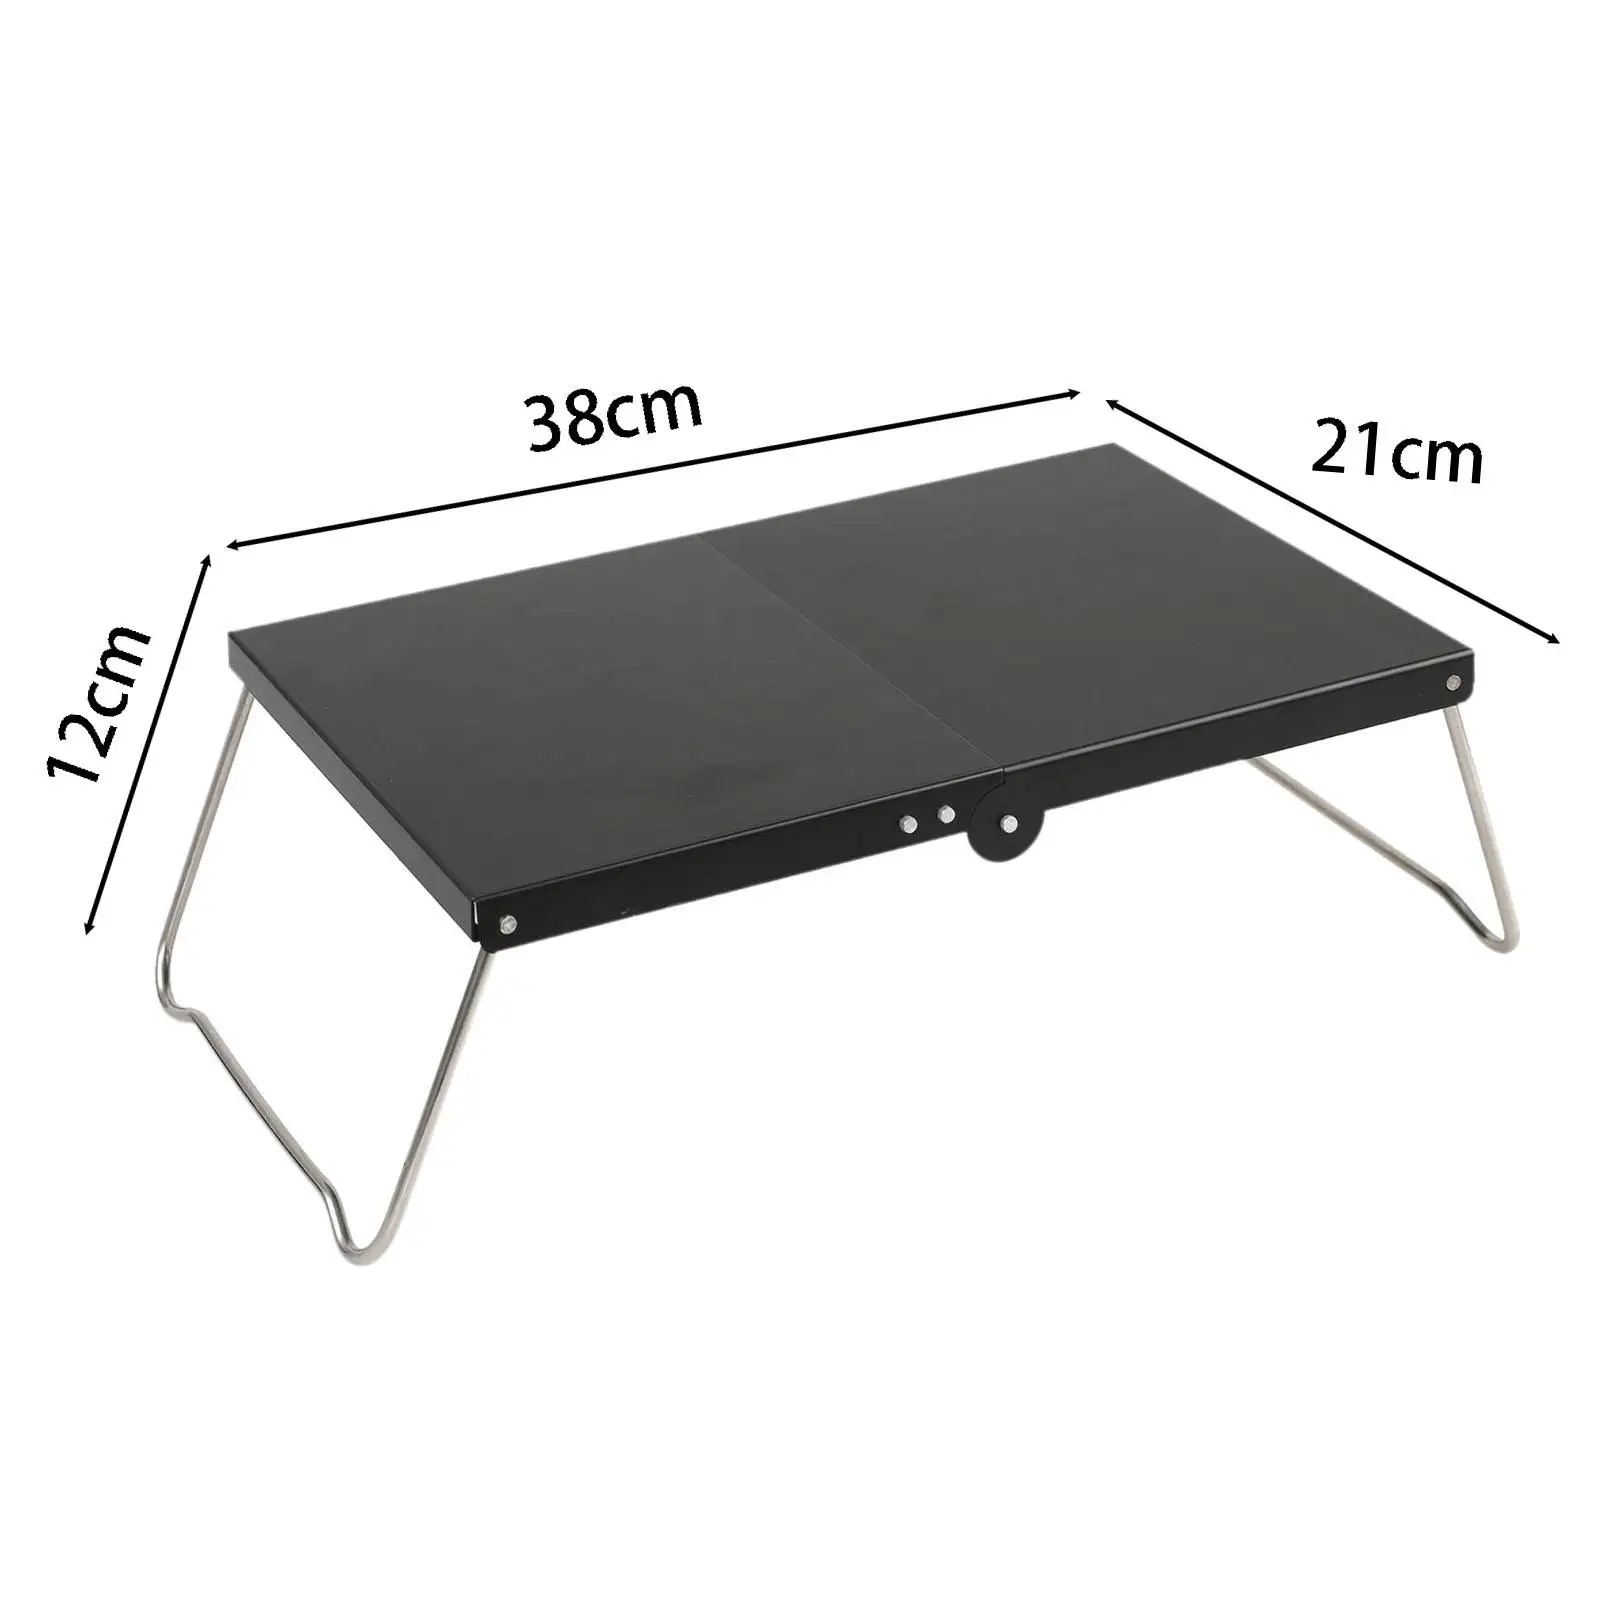 Camping Folding Table Portable Foldable Table for Barbecue Travel Yard